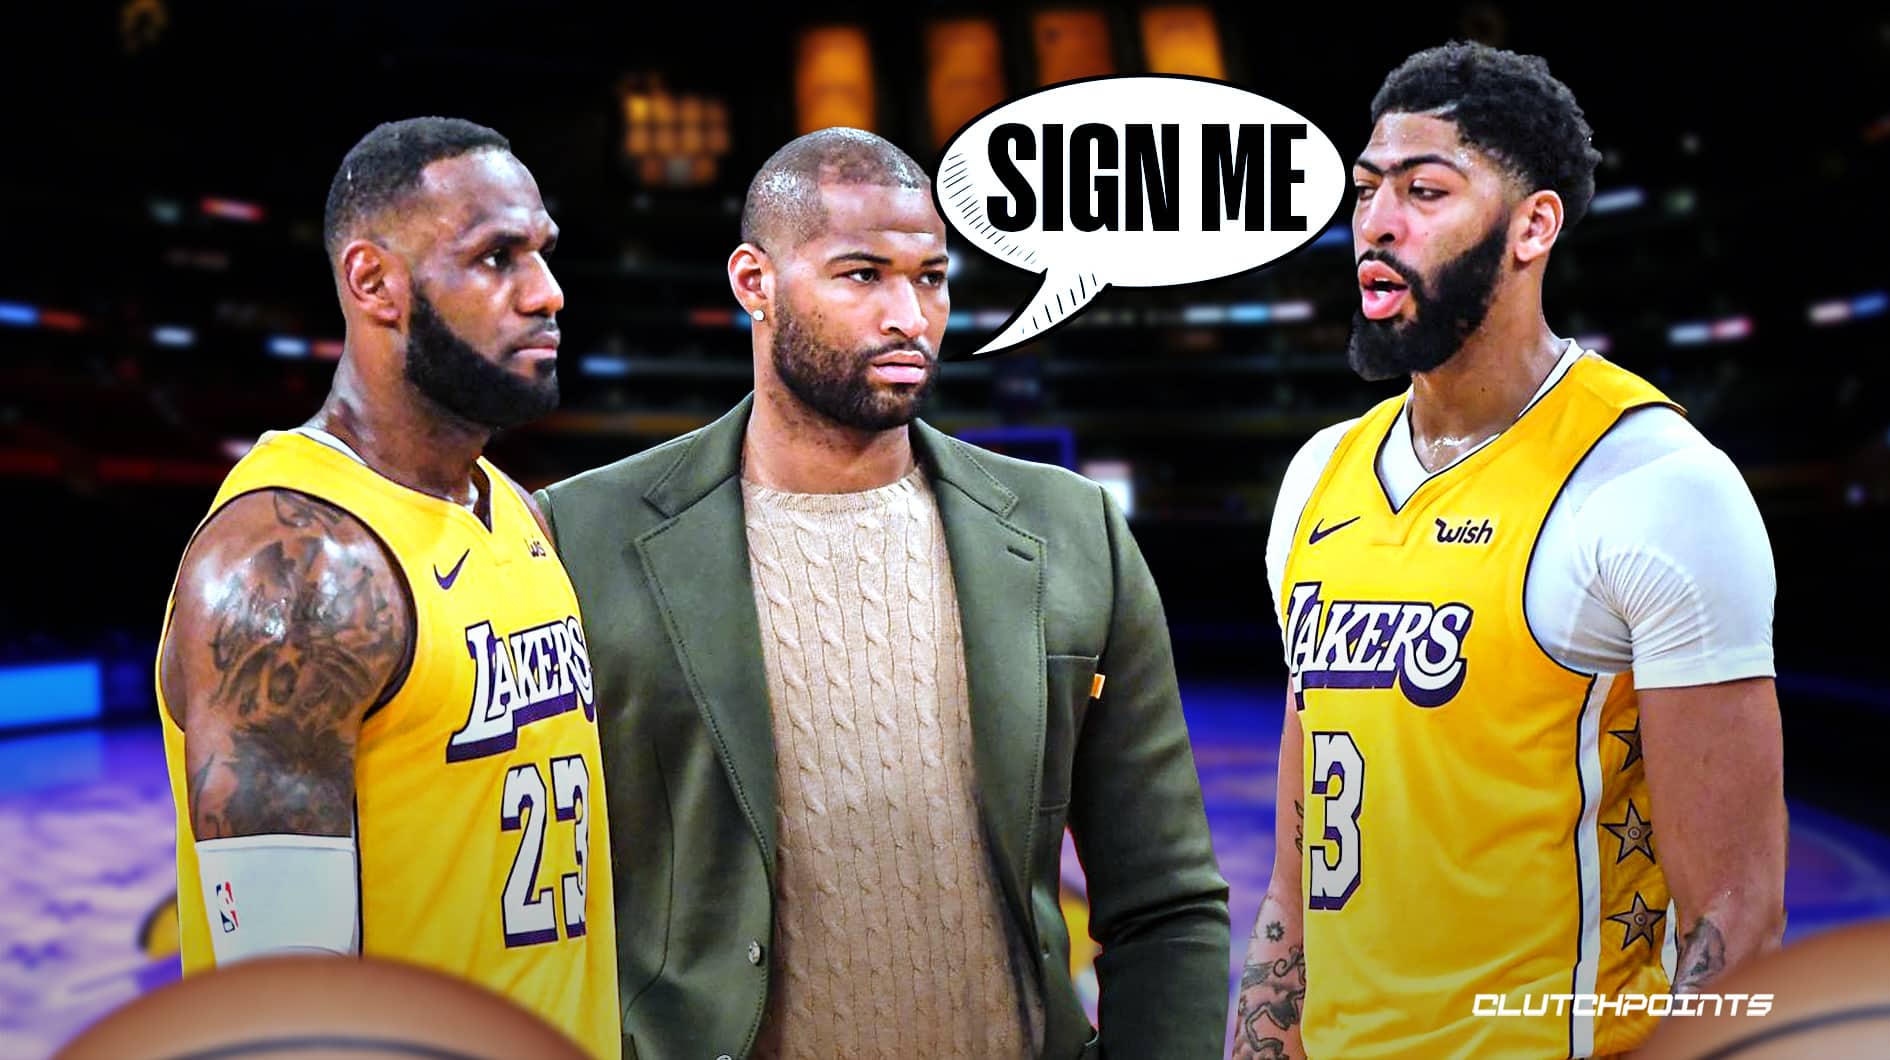 DeMarcus Cousins' workout date with Lakers, revealed